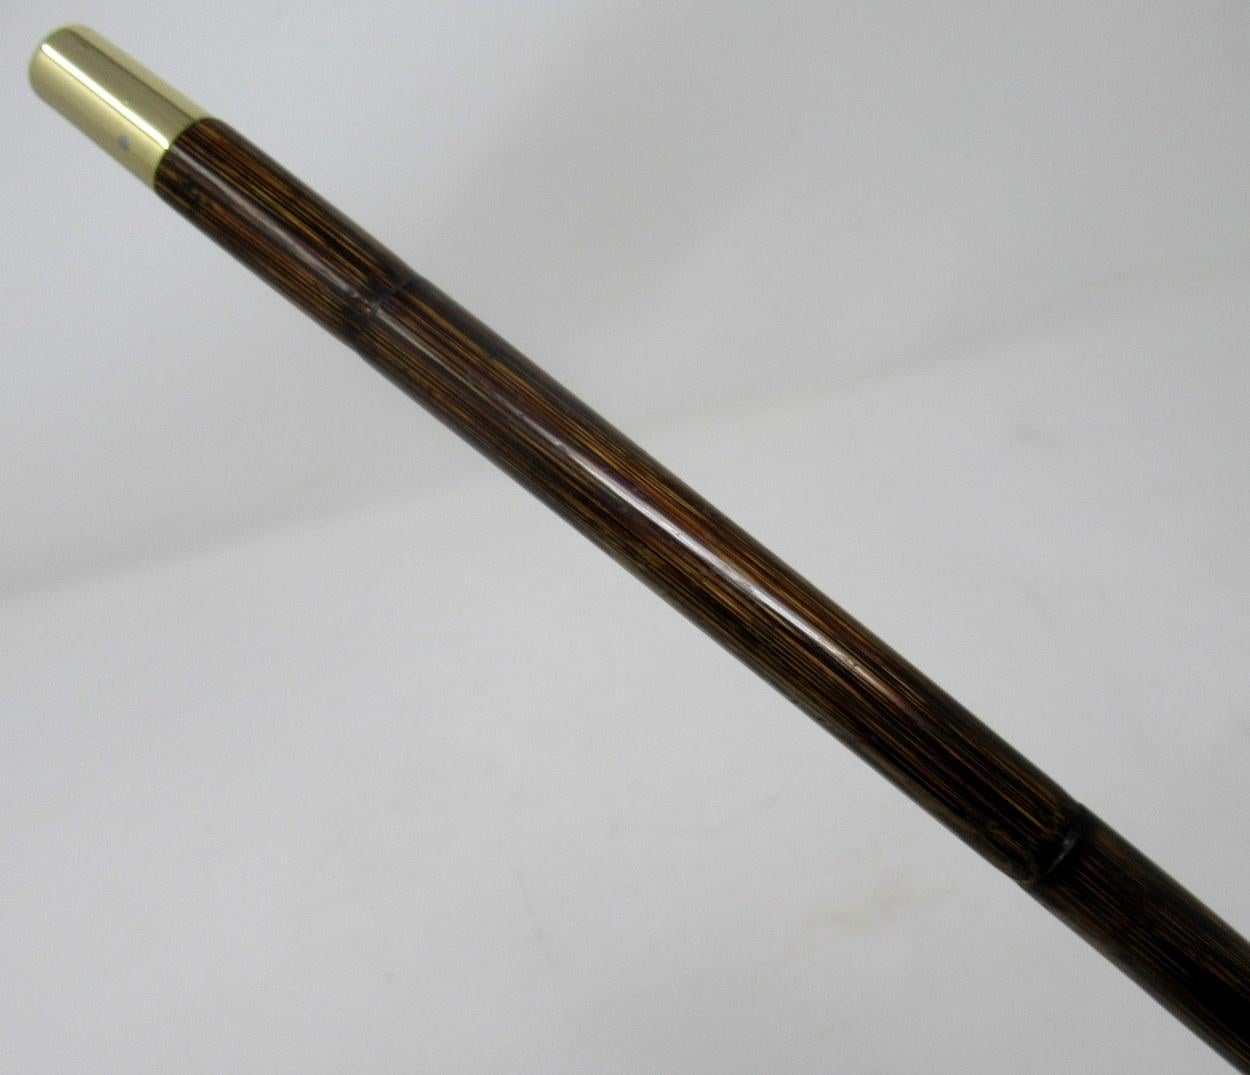 swagger stick for sale